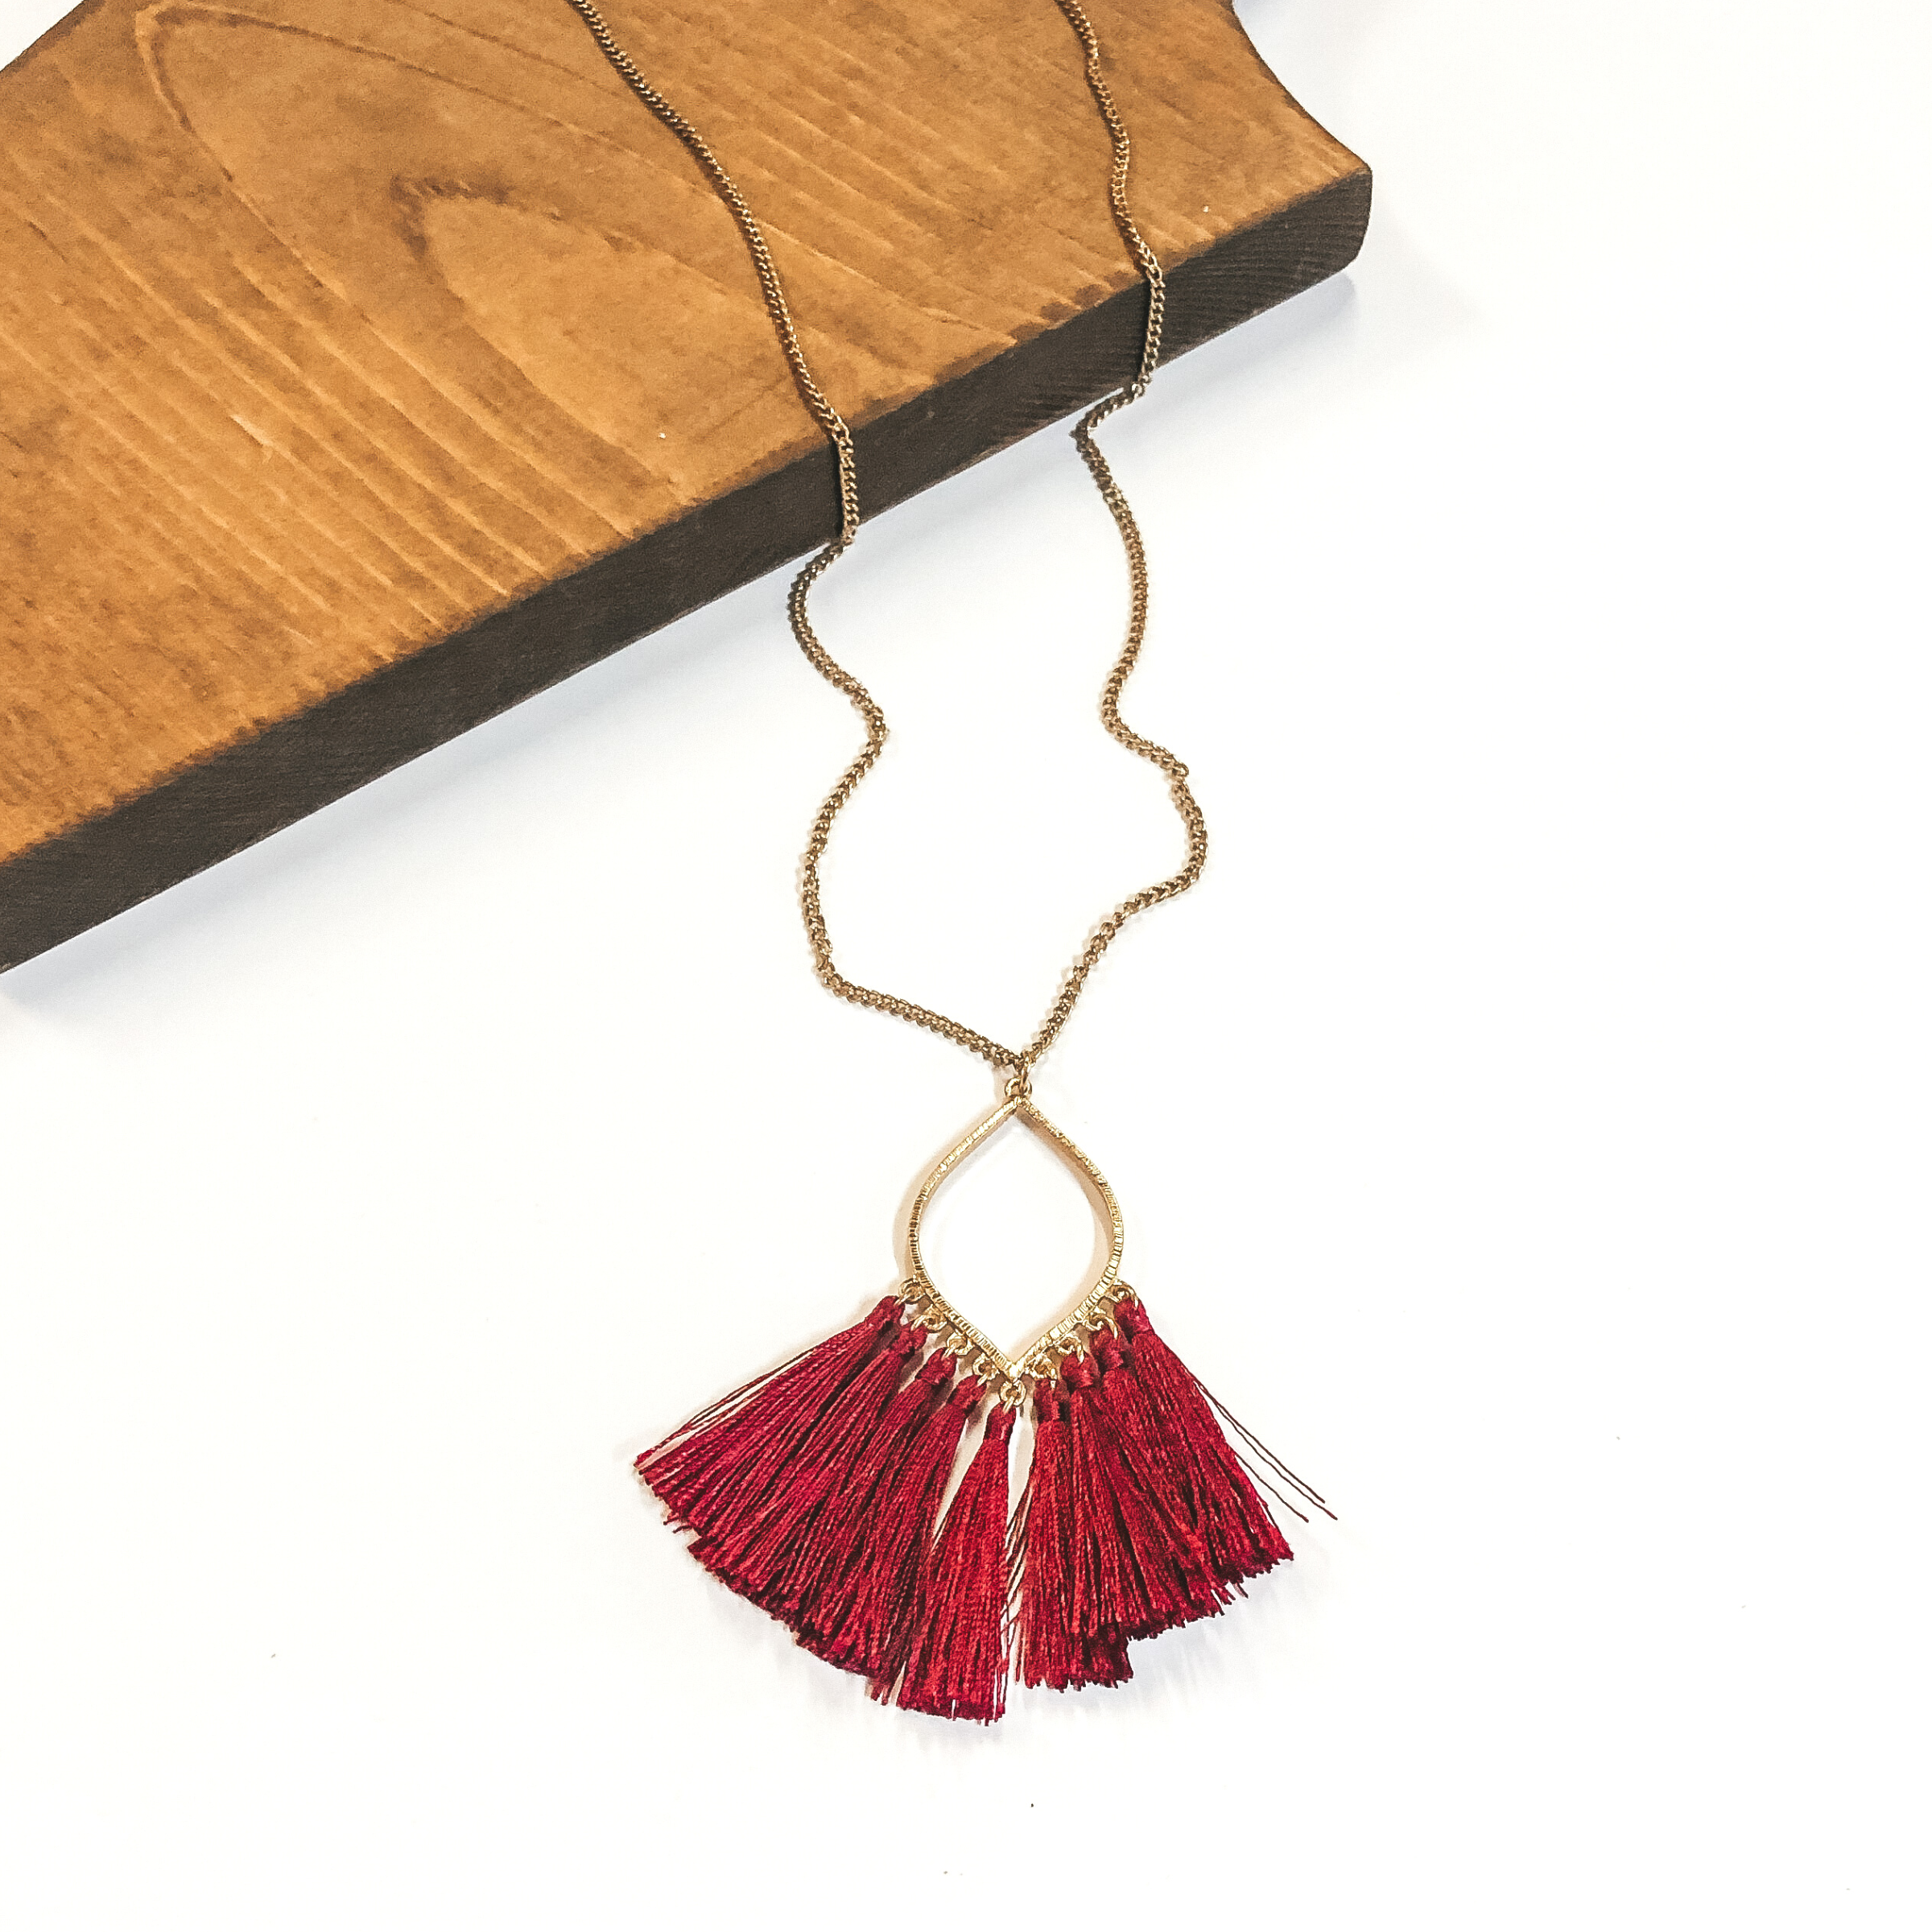 Gold Chain Lantern Outline Necklace with Fringe Tassels in Maroon - Giddy Up Glamour Boutique